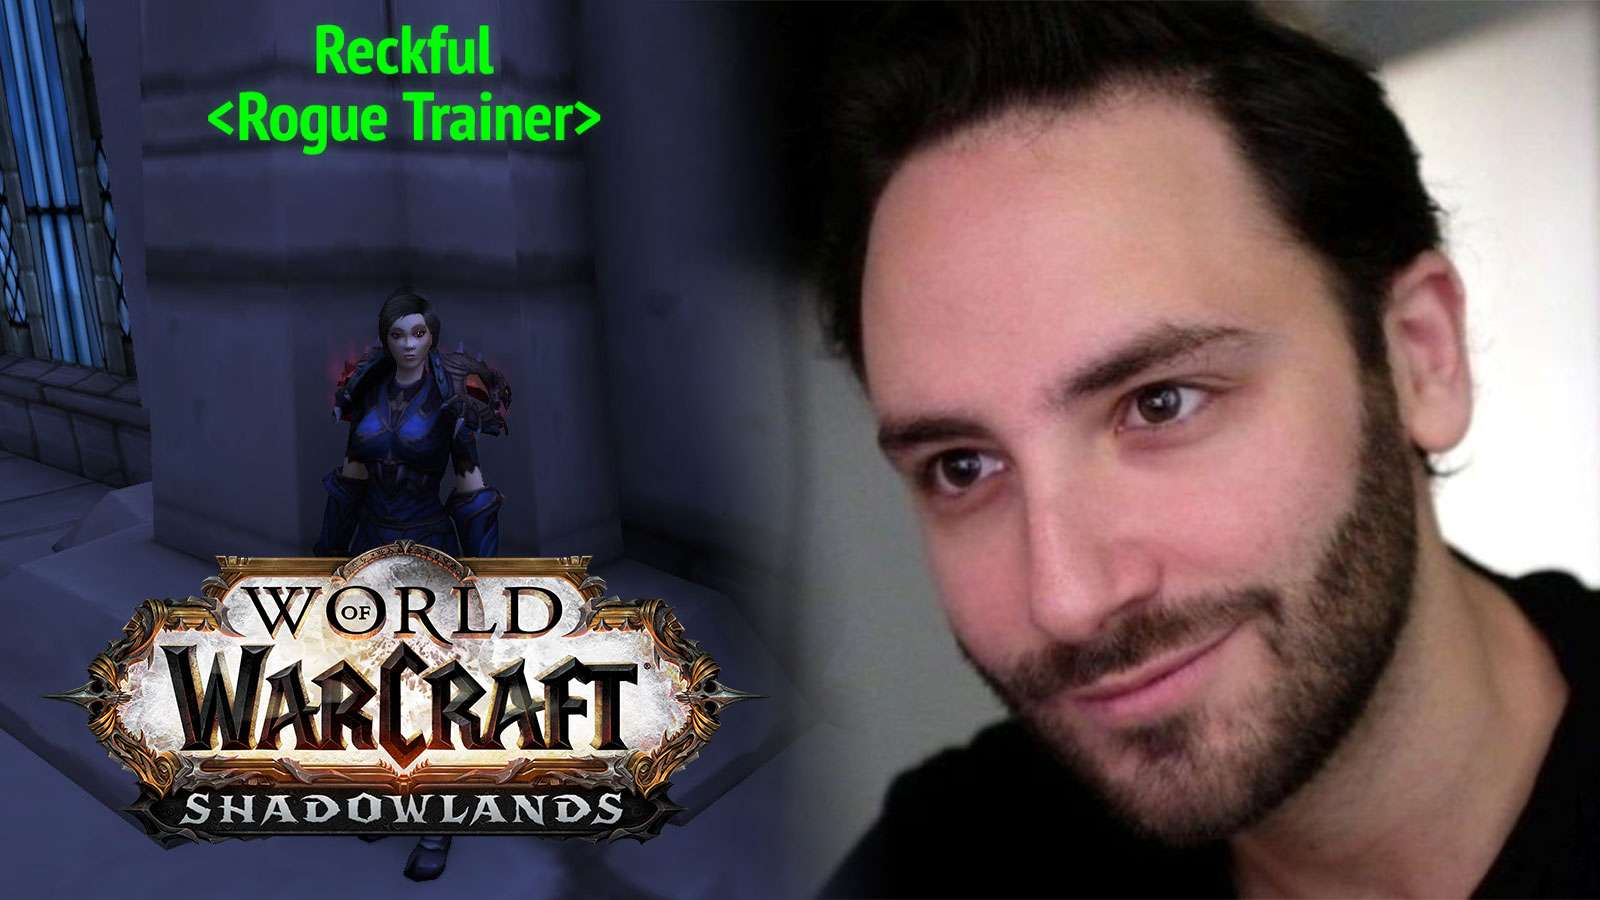 Reckful WoW tribute Shadowlands